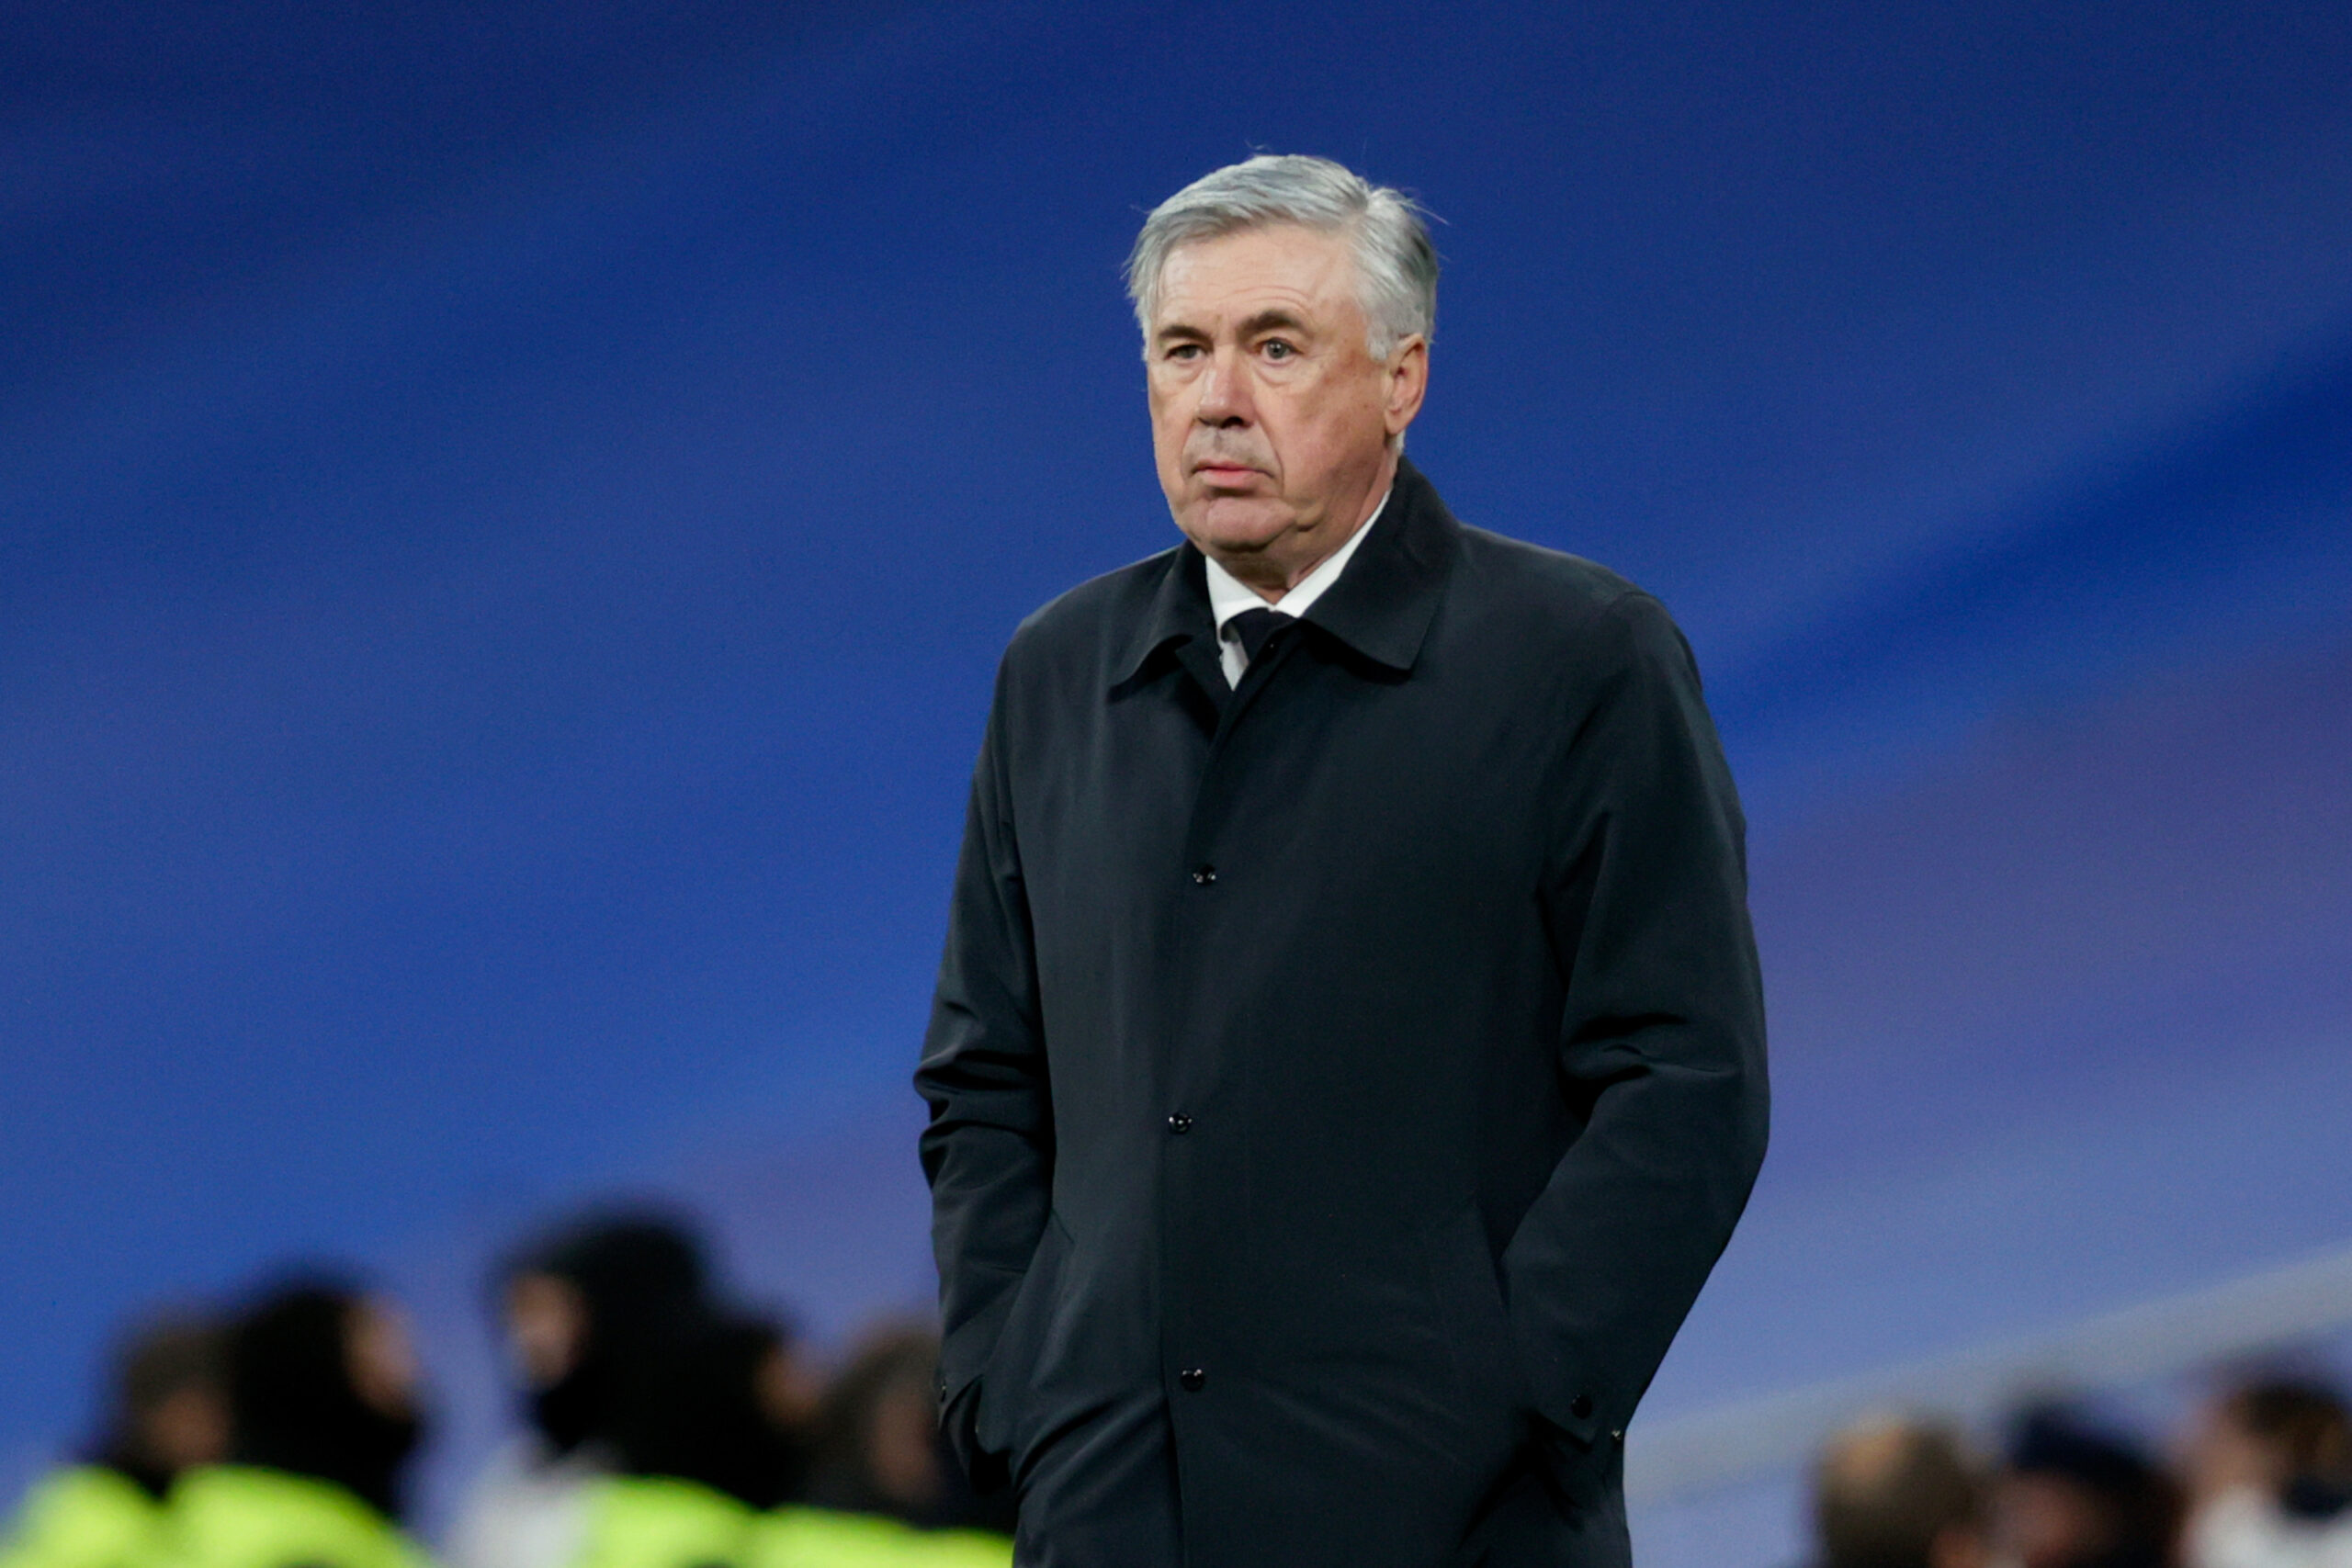 MADRID, SPAIN - FEBRUARY 19: Coach Carlo Ancelotti of Real Madrid  during the La Liga Santander  match between Real Madrid v Deportivo Alaves at the Santiago Bernaubeu on February 19, 2022 in Madrid Spain (Photo by David S. Bustamante/Soccrates/Getty Images)